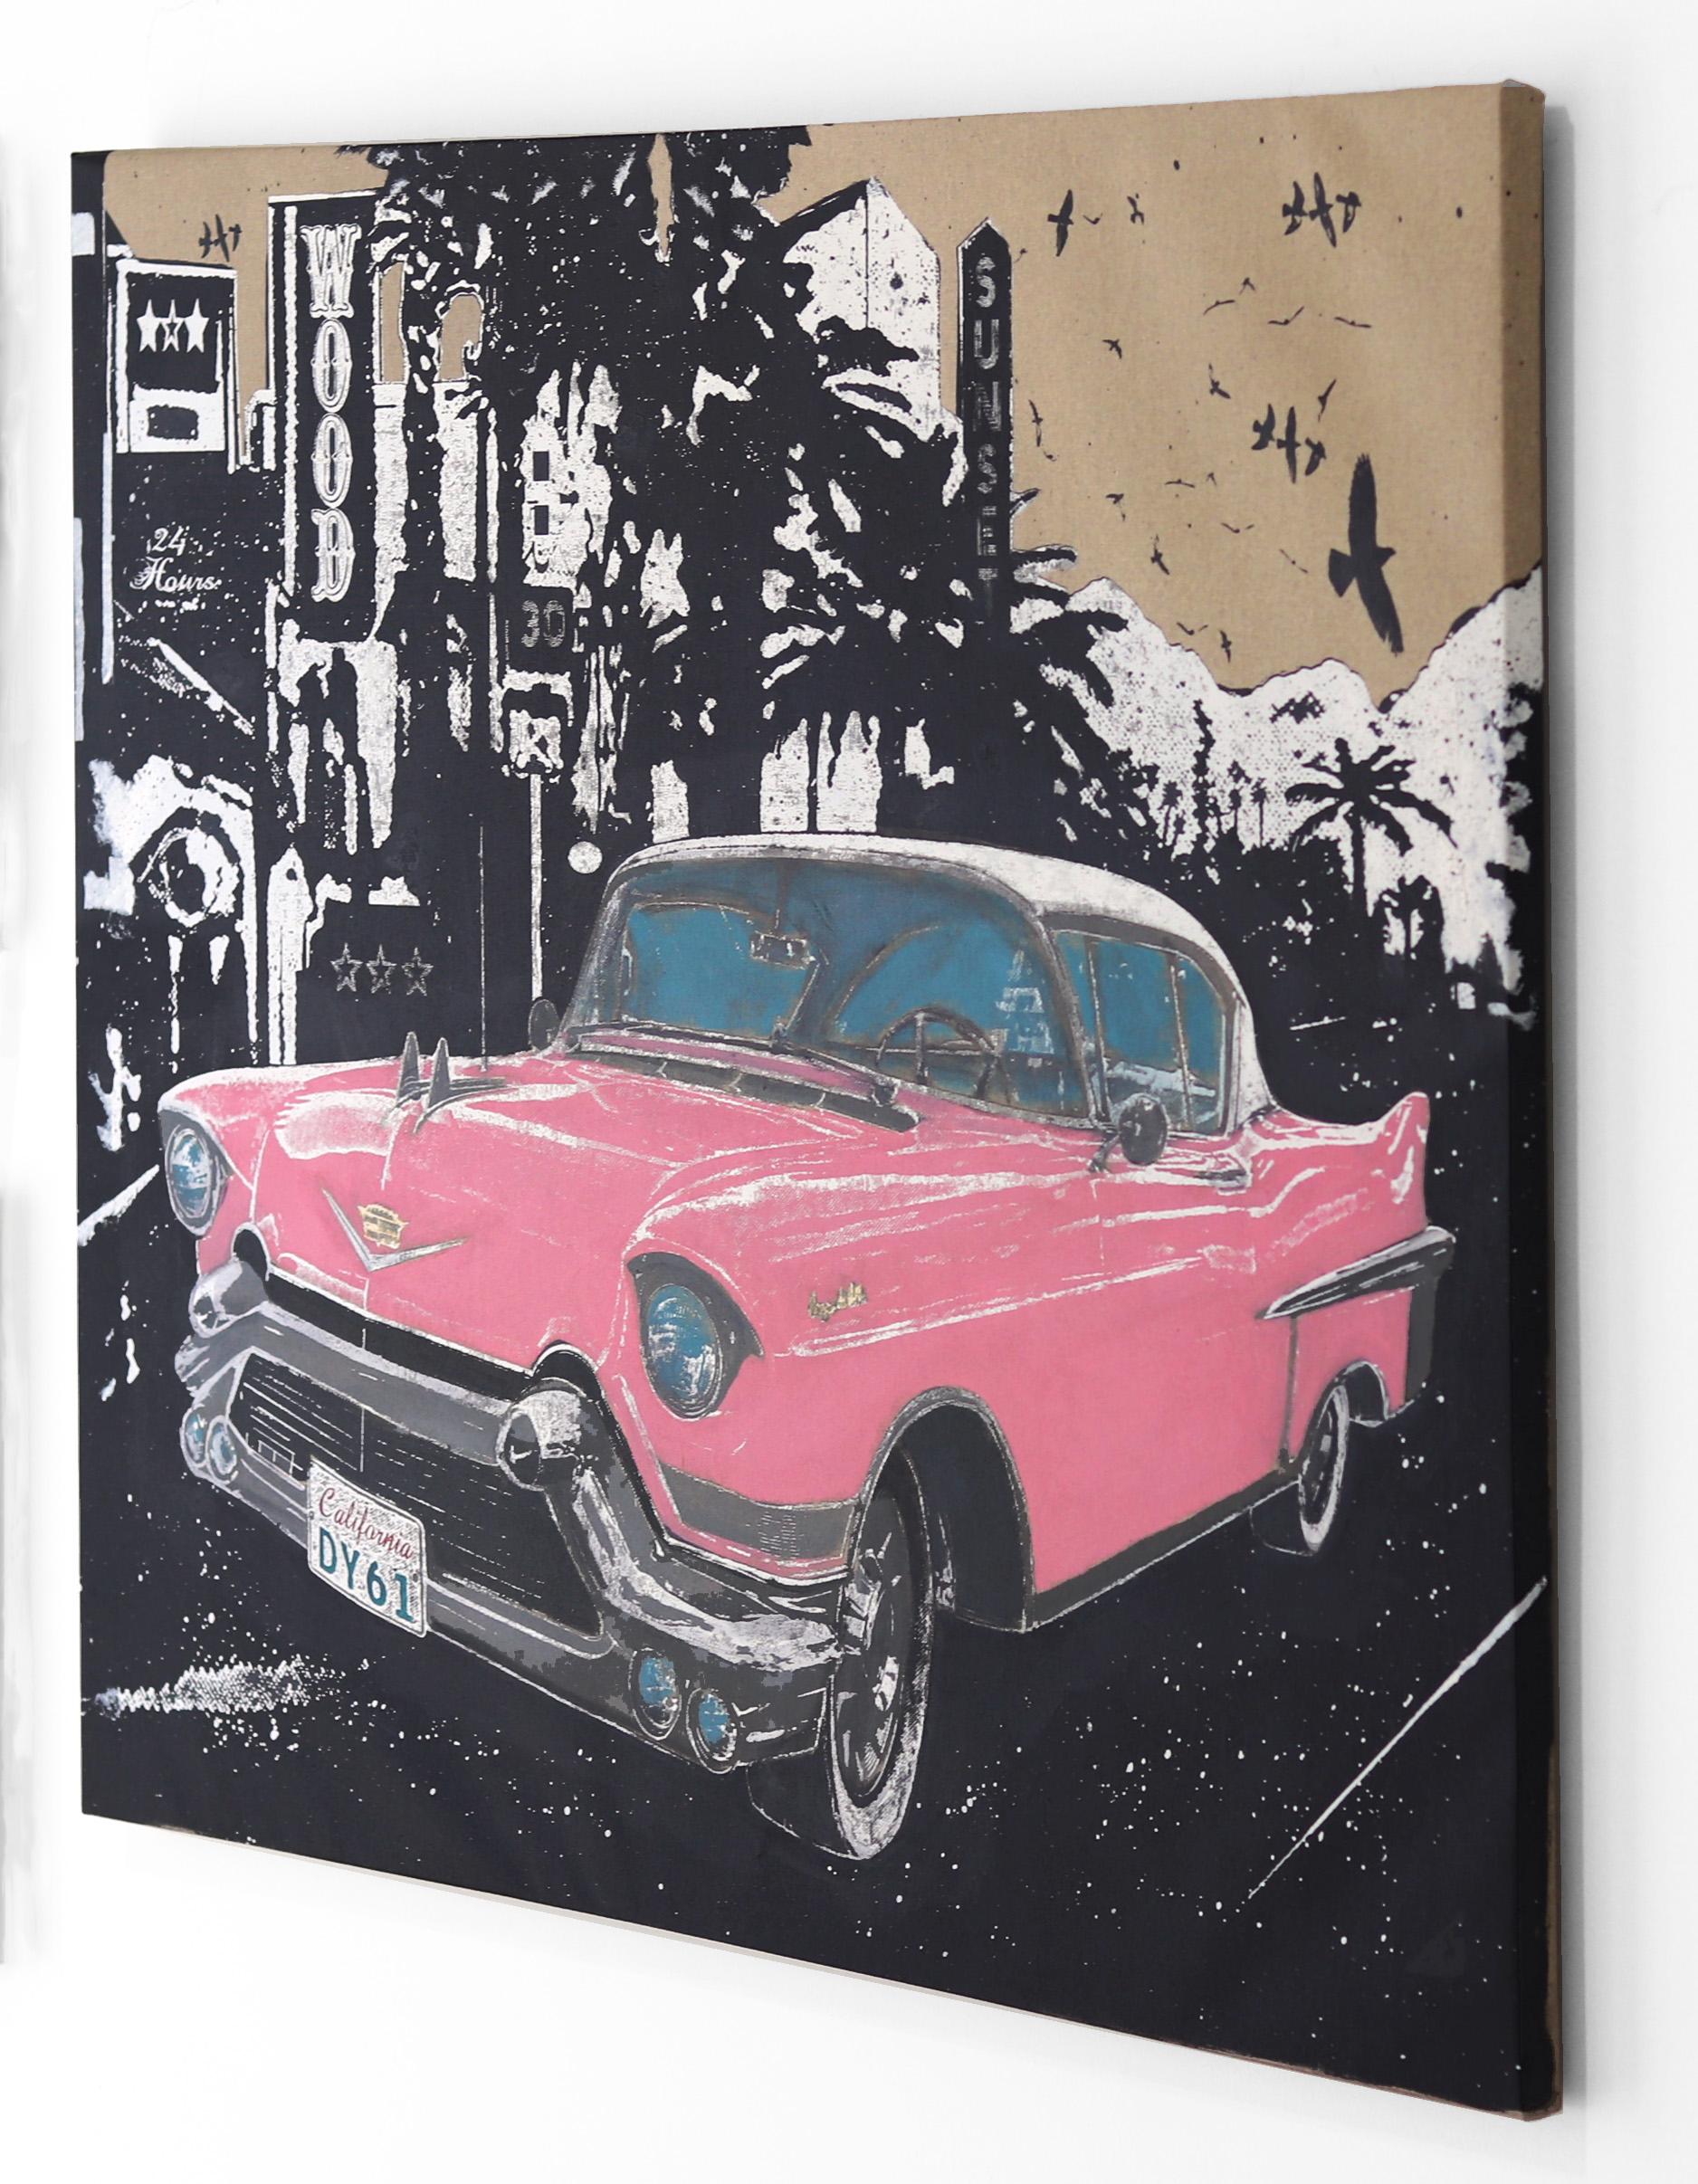 Riding In Style - Original Classic Pink Car Art: Elegance of Vintage Automotive - Pop Art Mixed Media Art by Carl Smith